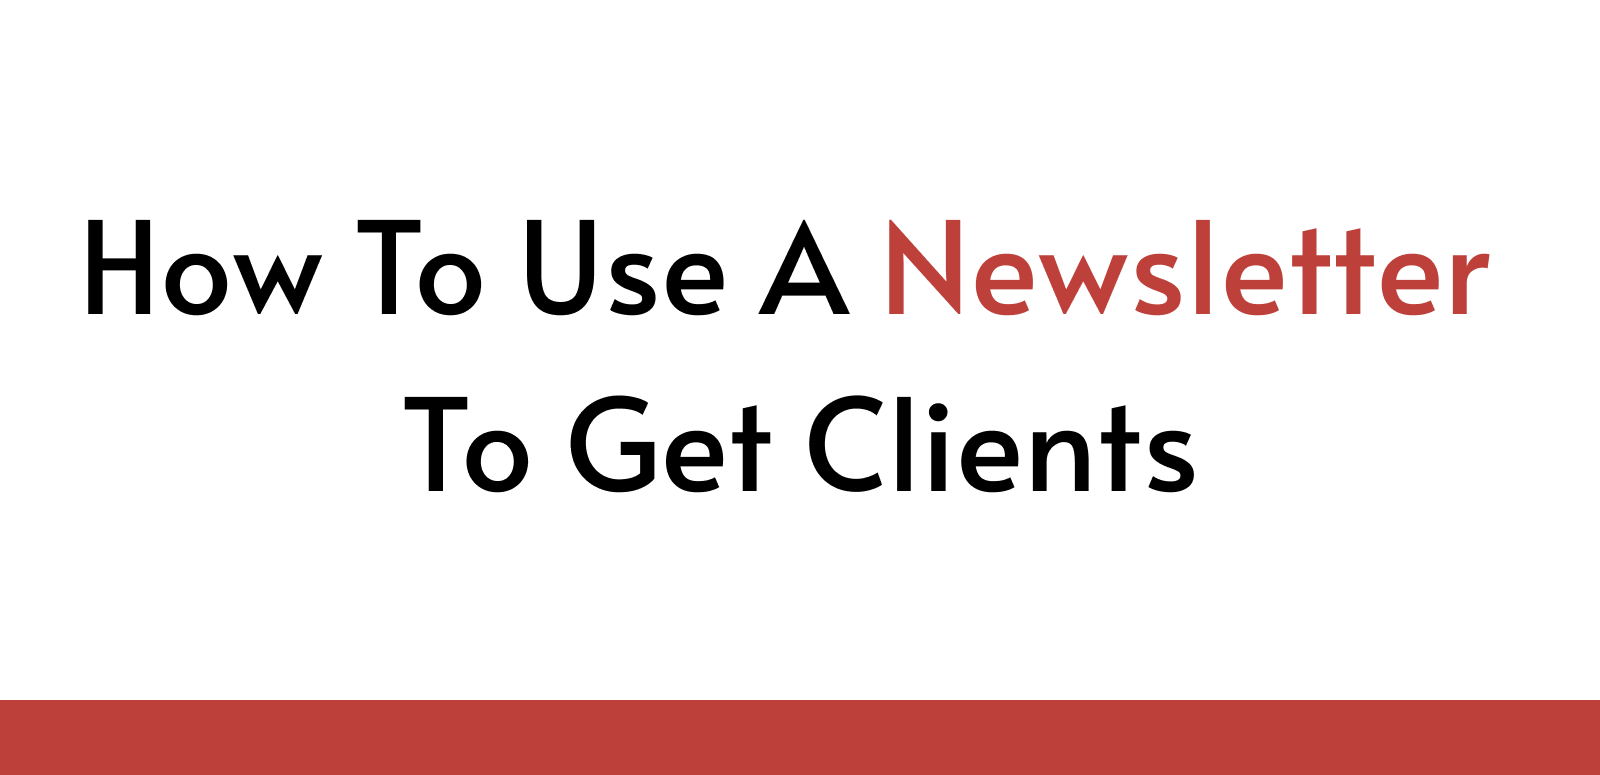 How To Use A Newsletter To Get Clients